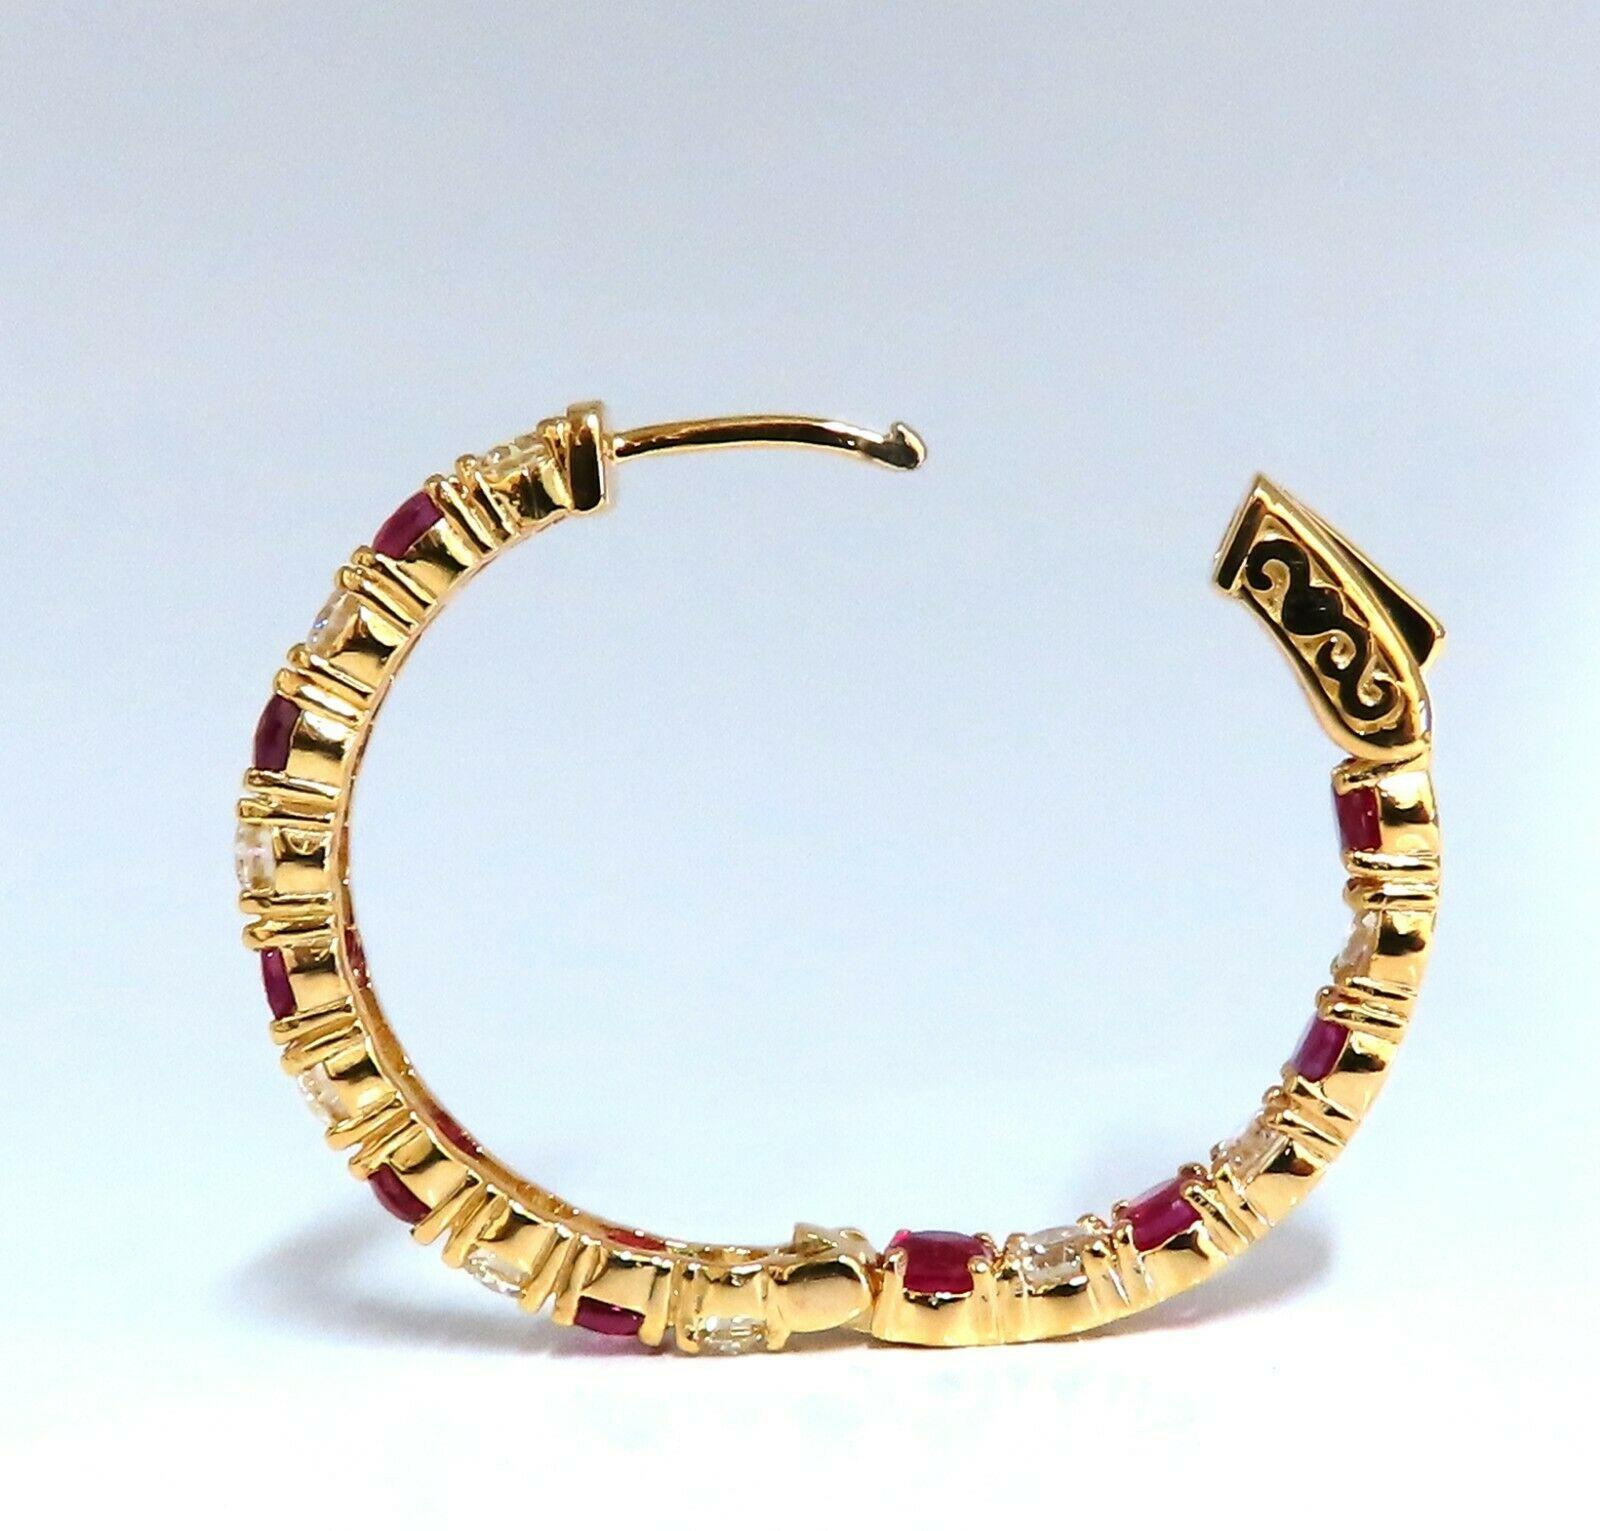 Inside/out  natural Ruby and Diamond hoop earrings.

4.53ct. round rubies, full brilliant cut clean clarity and transparent

2.66ct. natural round diamonds G color vs2 clarity.

14 karat yellow gold 10.4 g

30mm wide (front to back)

3.8 mm wide at